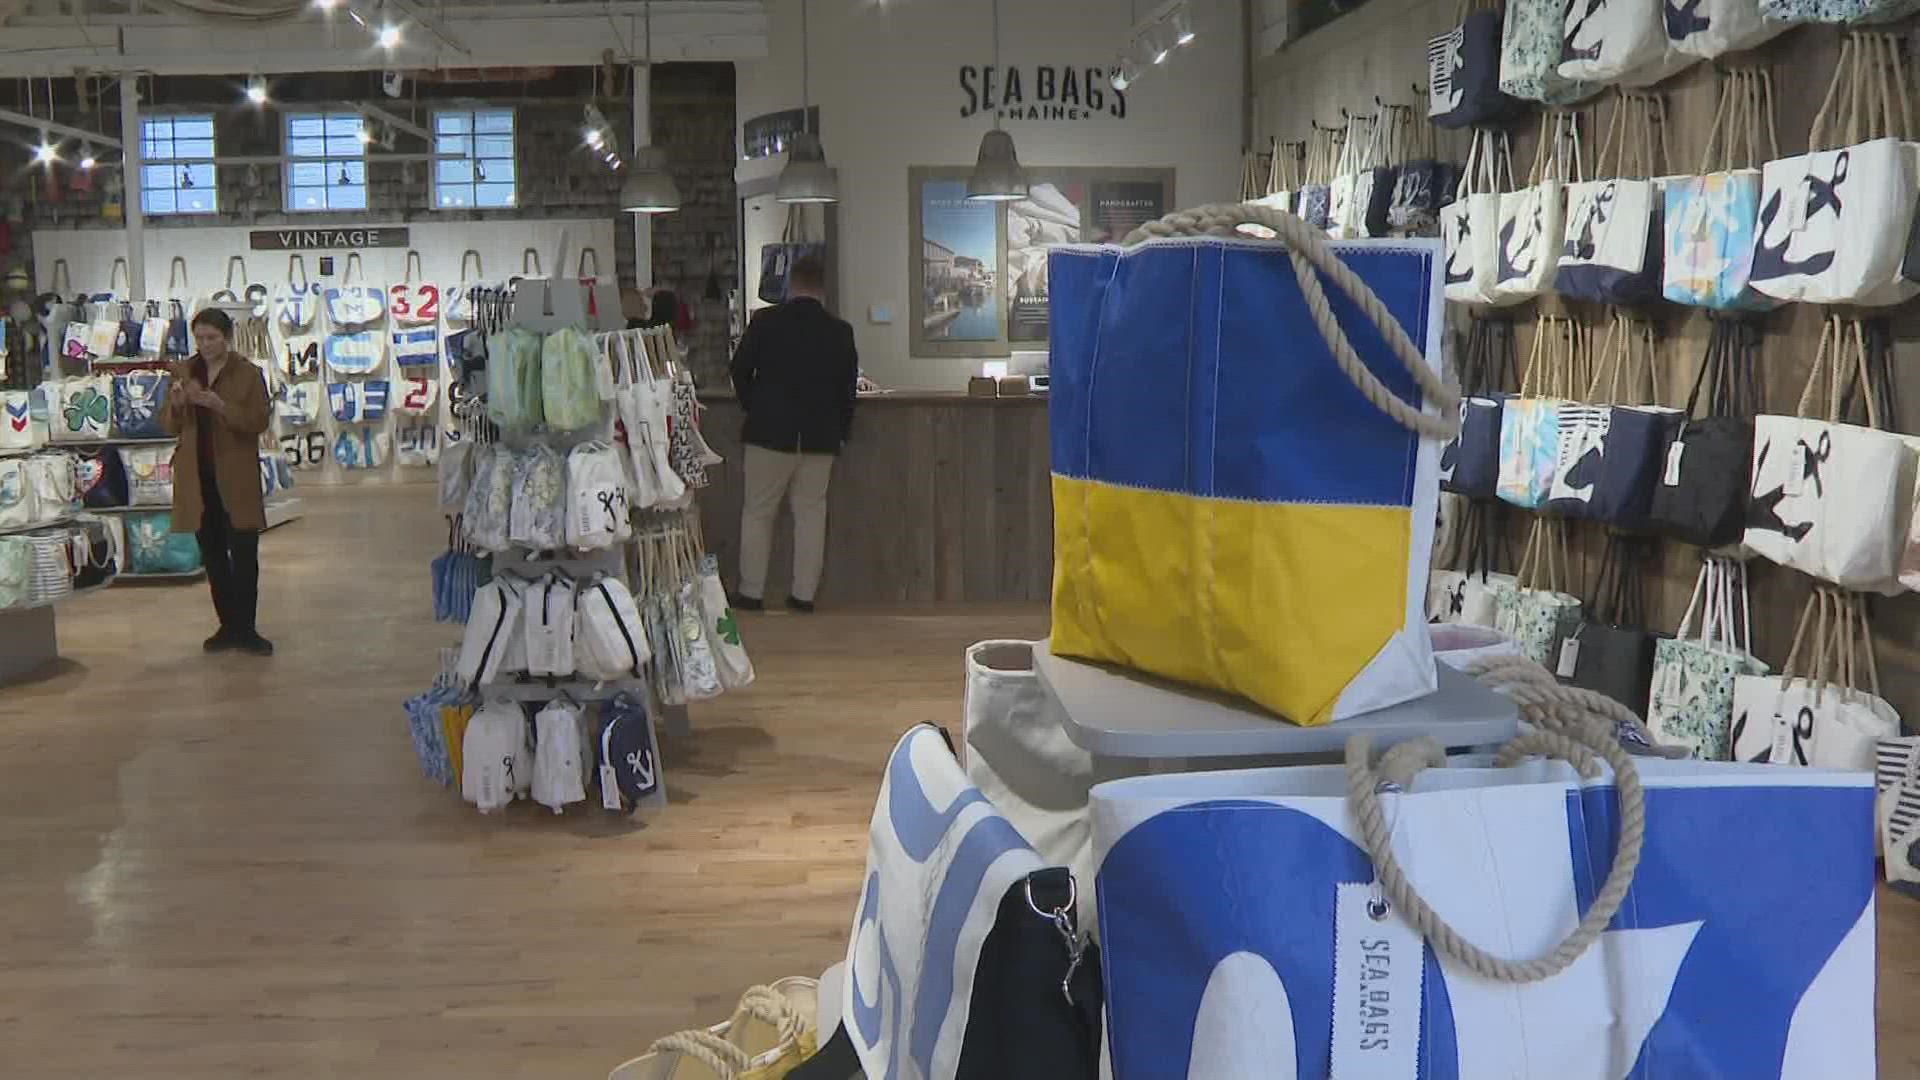 The company says 100-percent of the profits of the totes sold will go to World Central Kitchen and Razom for Ukraine to help with the humanitarian crisis in Ukraine.